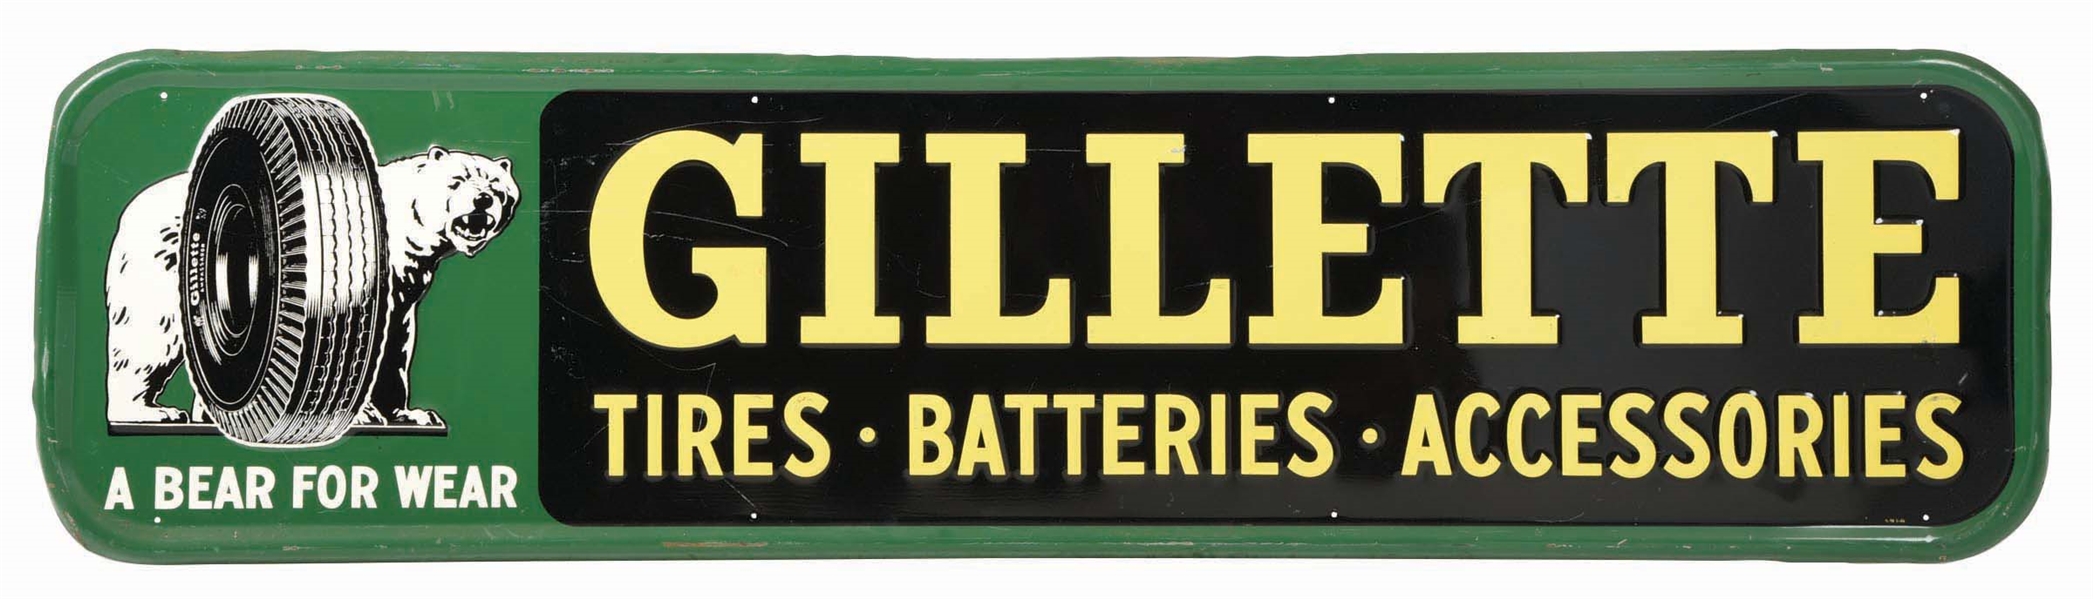 GILLETTE TIRES - BATTERIES - ACCESSORIES SIGN W/ BEAR GRAPHIC.